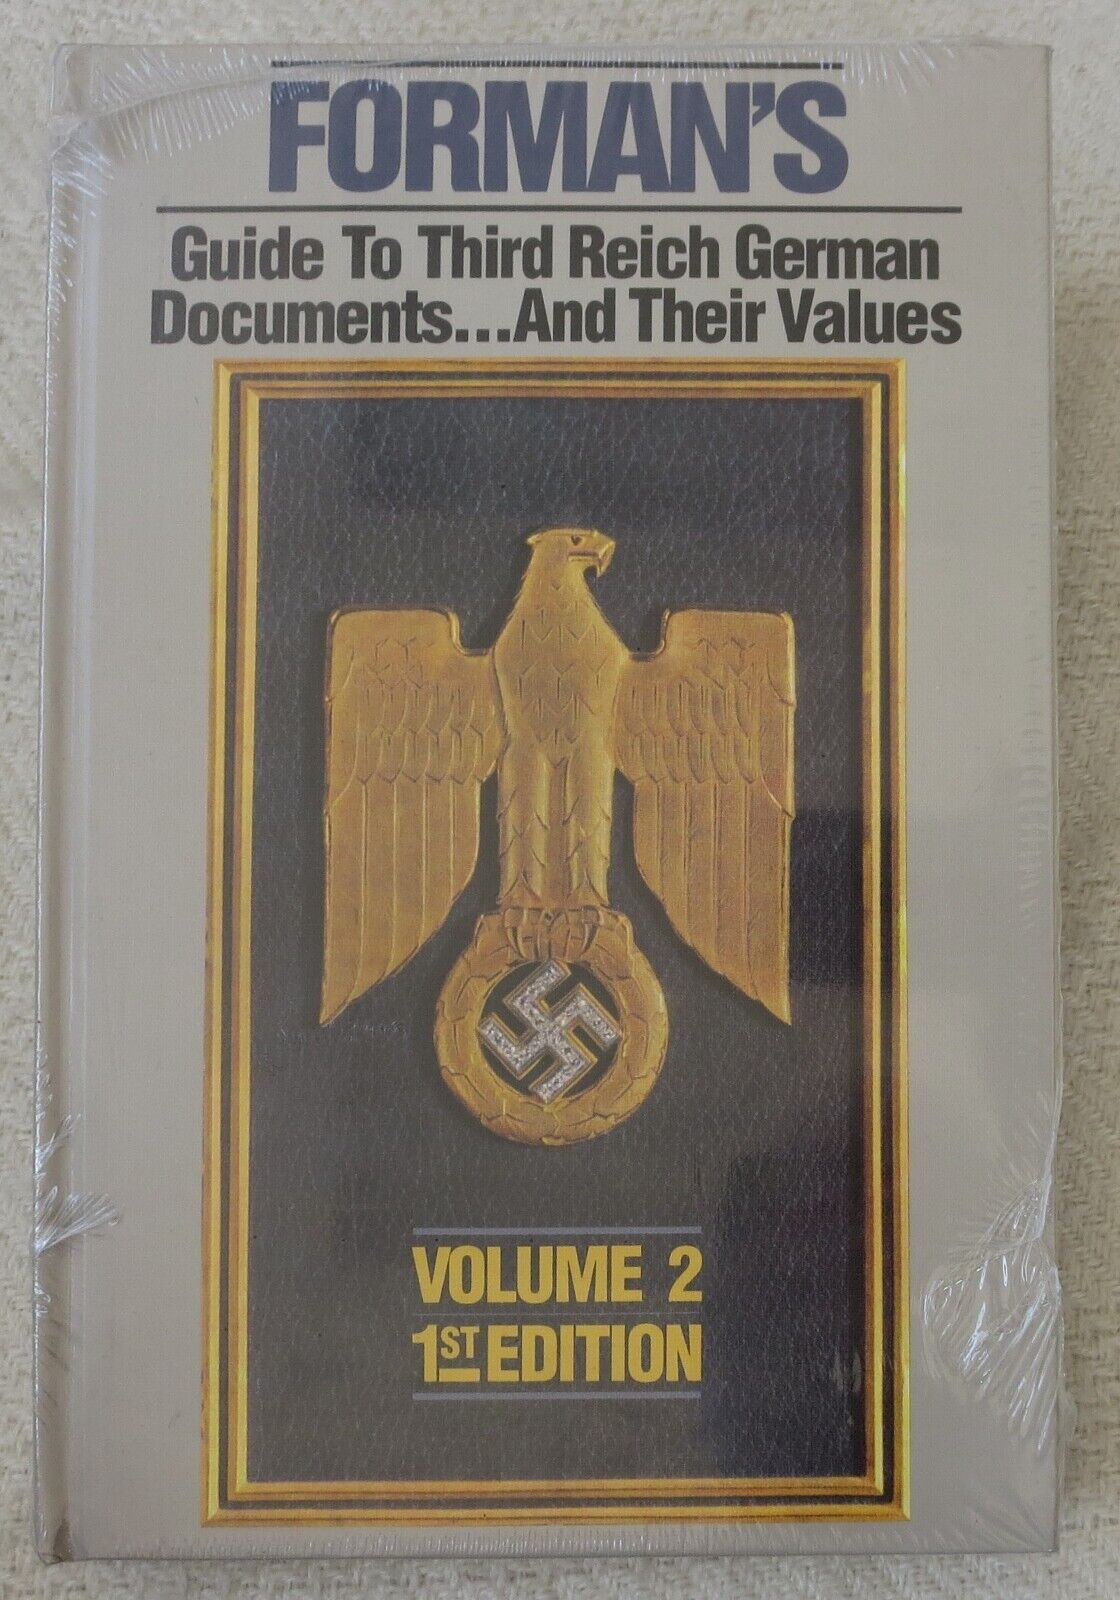 BENDER WW2 Reference BOOK FORMANS GUIDE 3rd REICH GERMAN DOCUMENTS, VALUES Vol 2